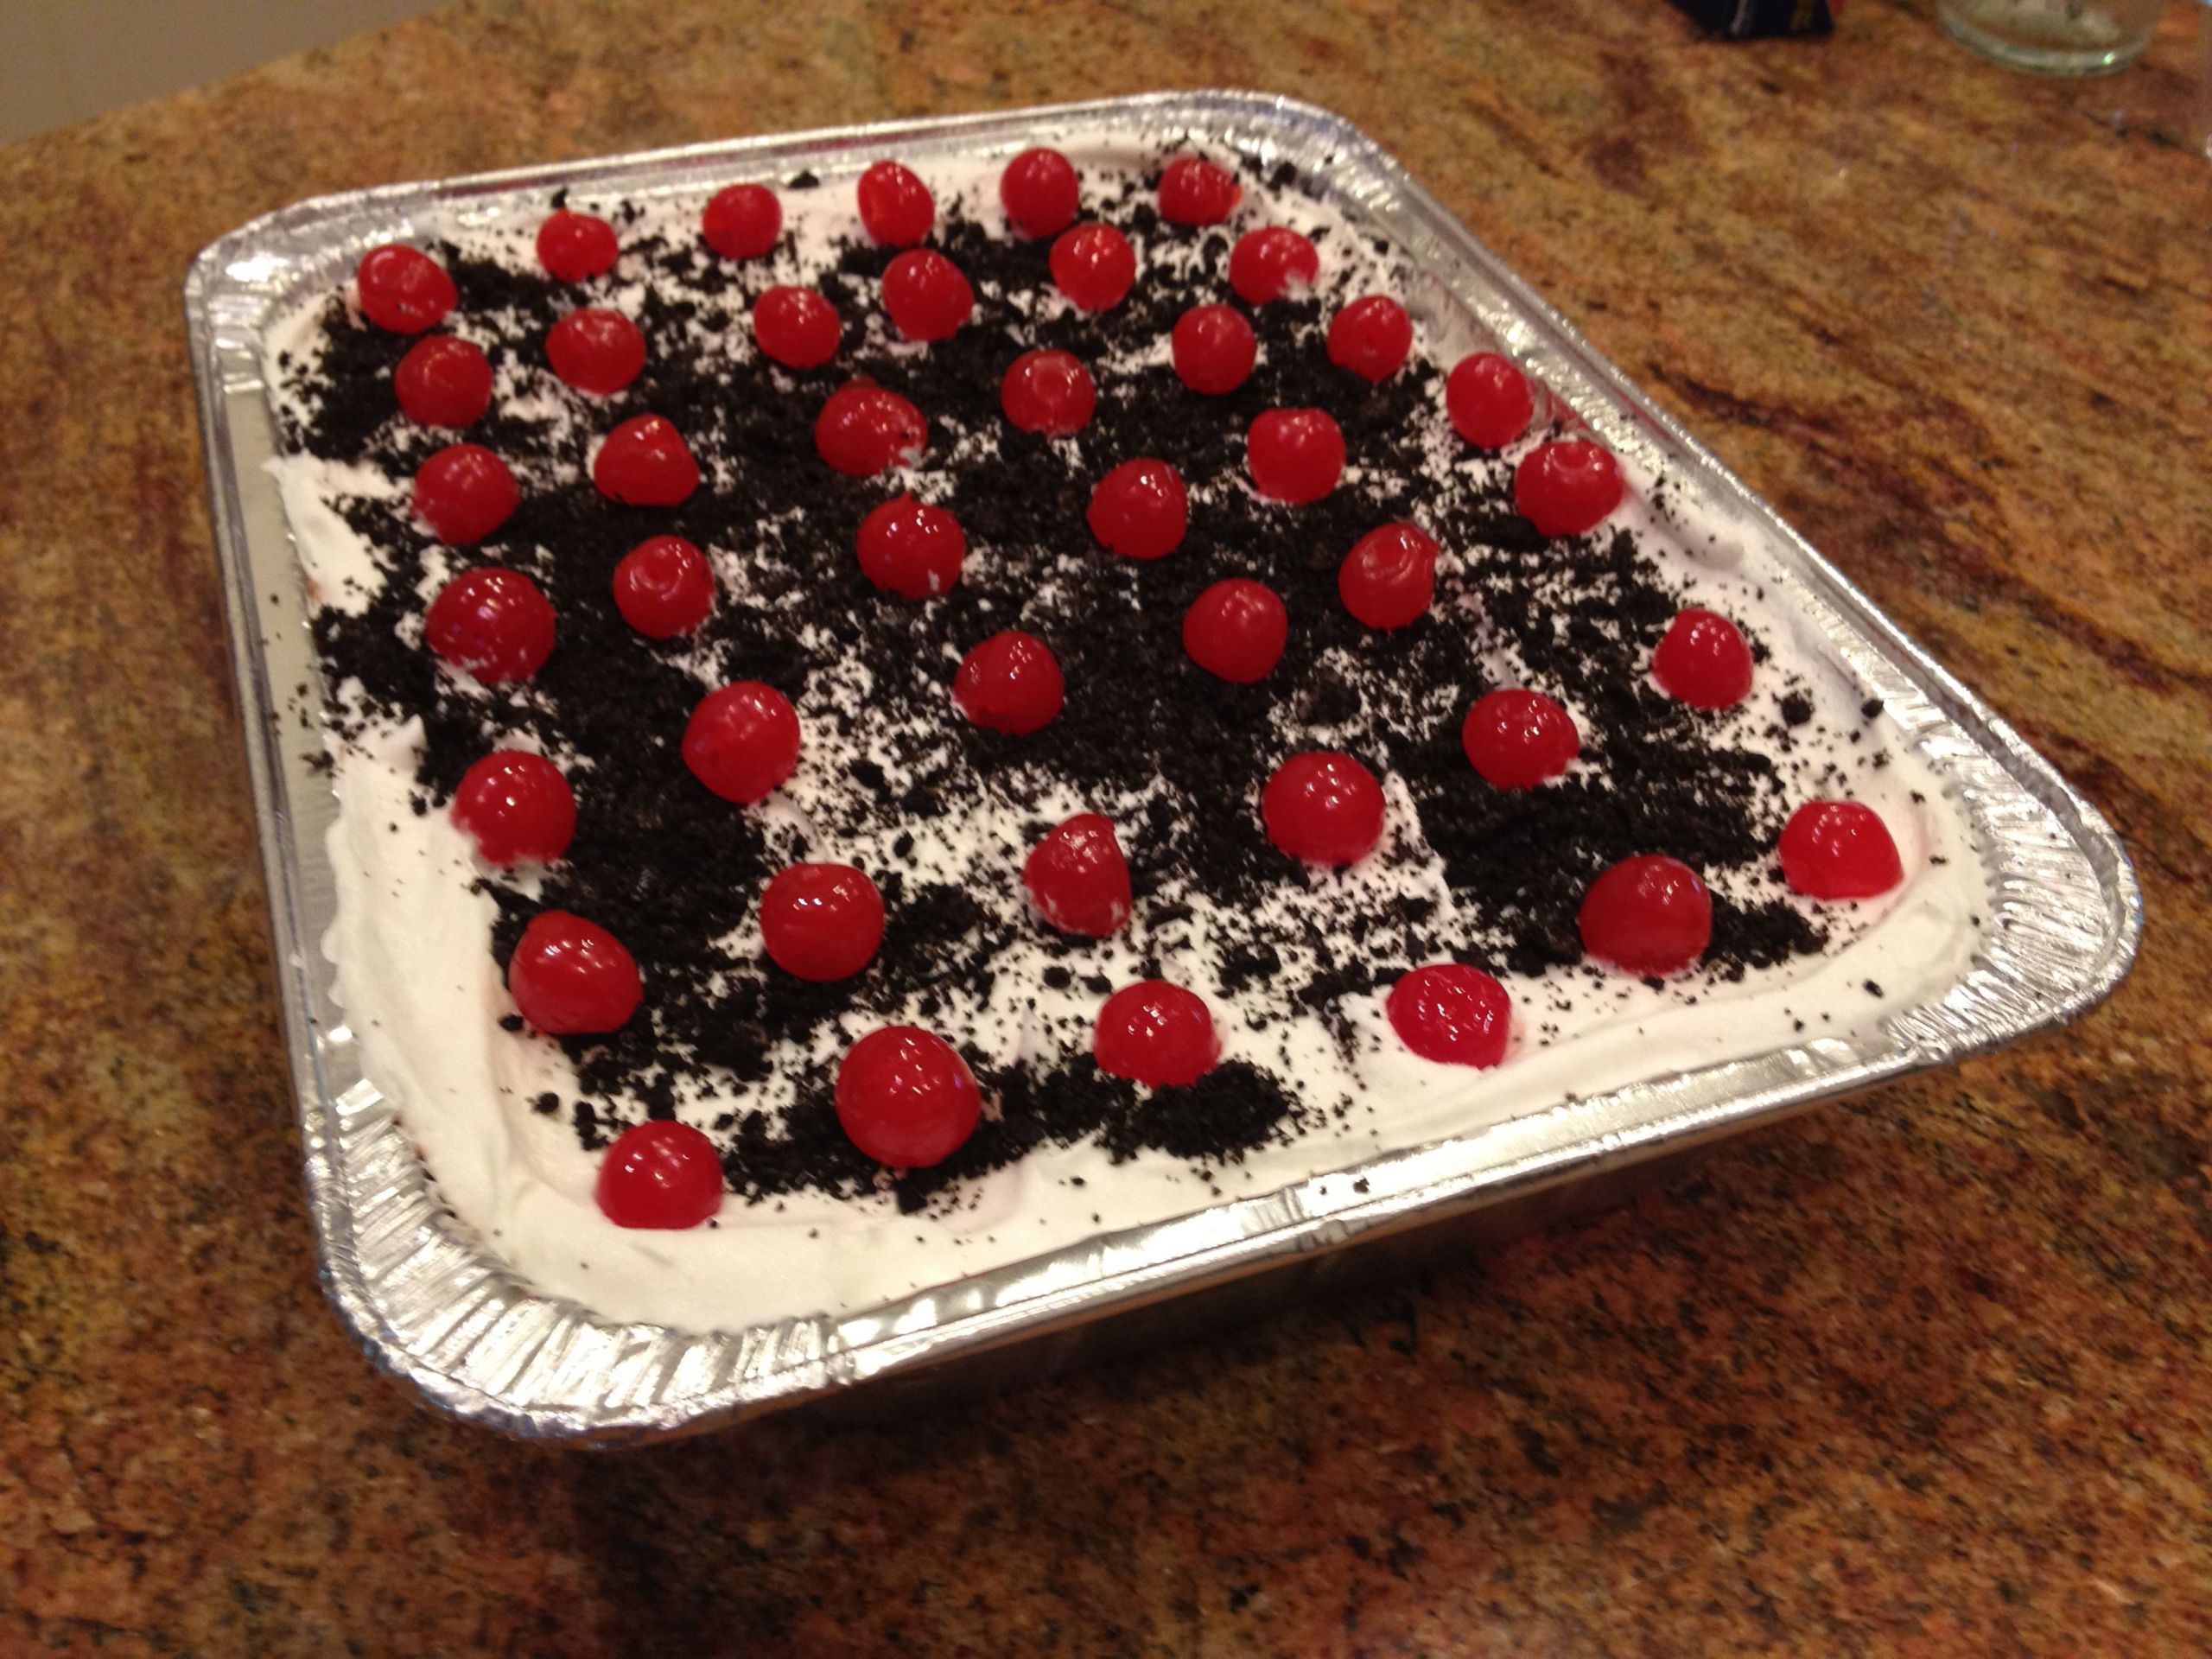 Oreo Dessert With Cool Whip
 oreo dessert with cream cheese cool whip